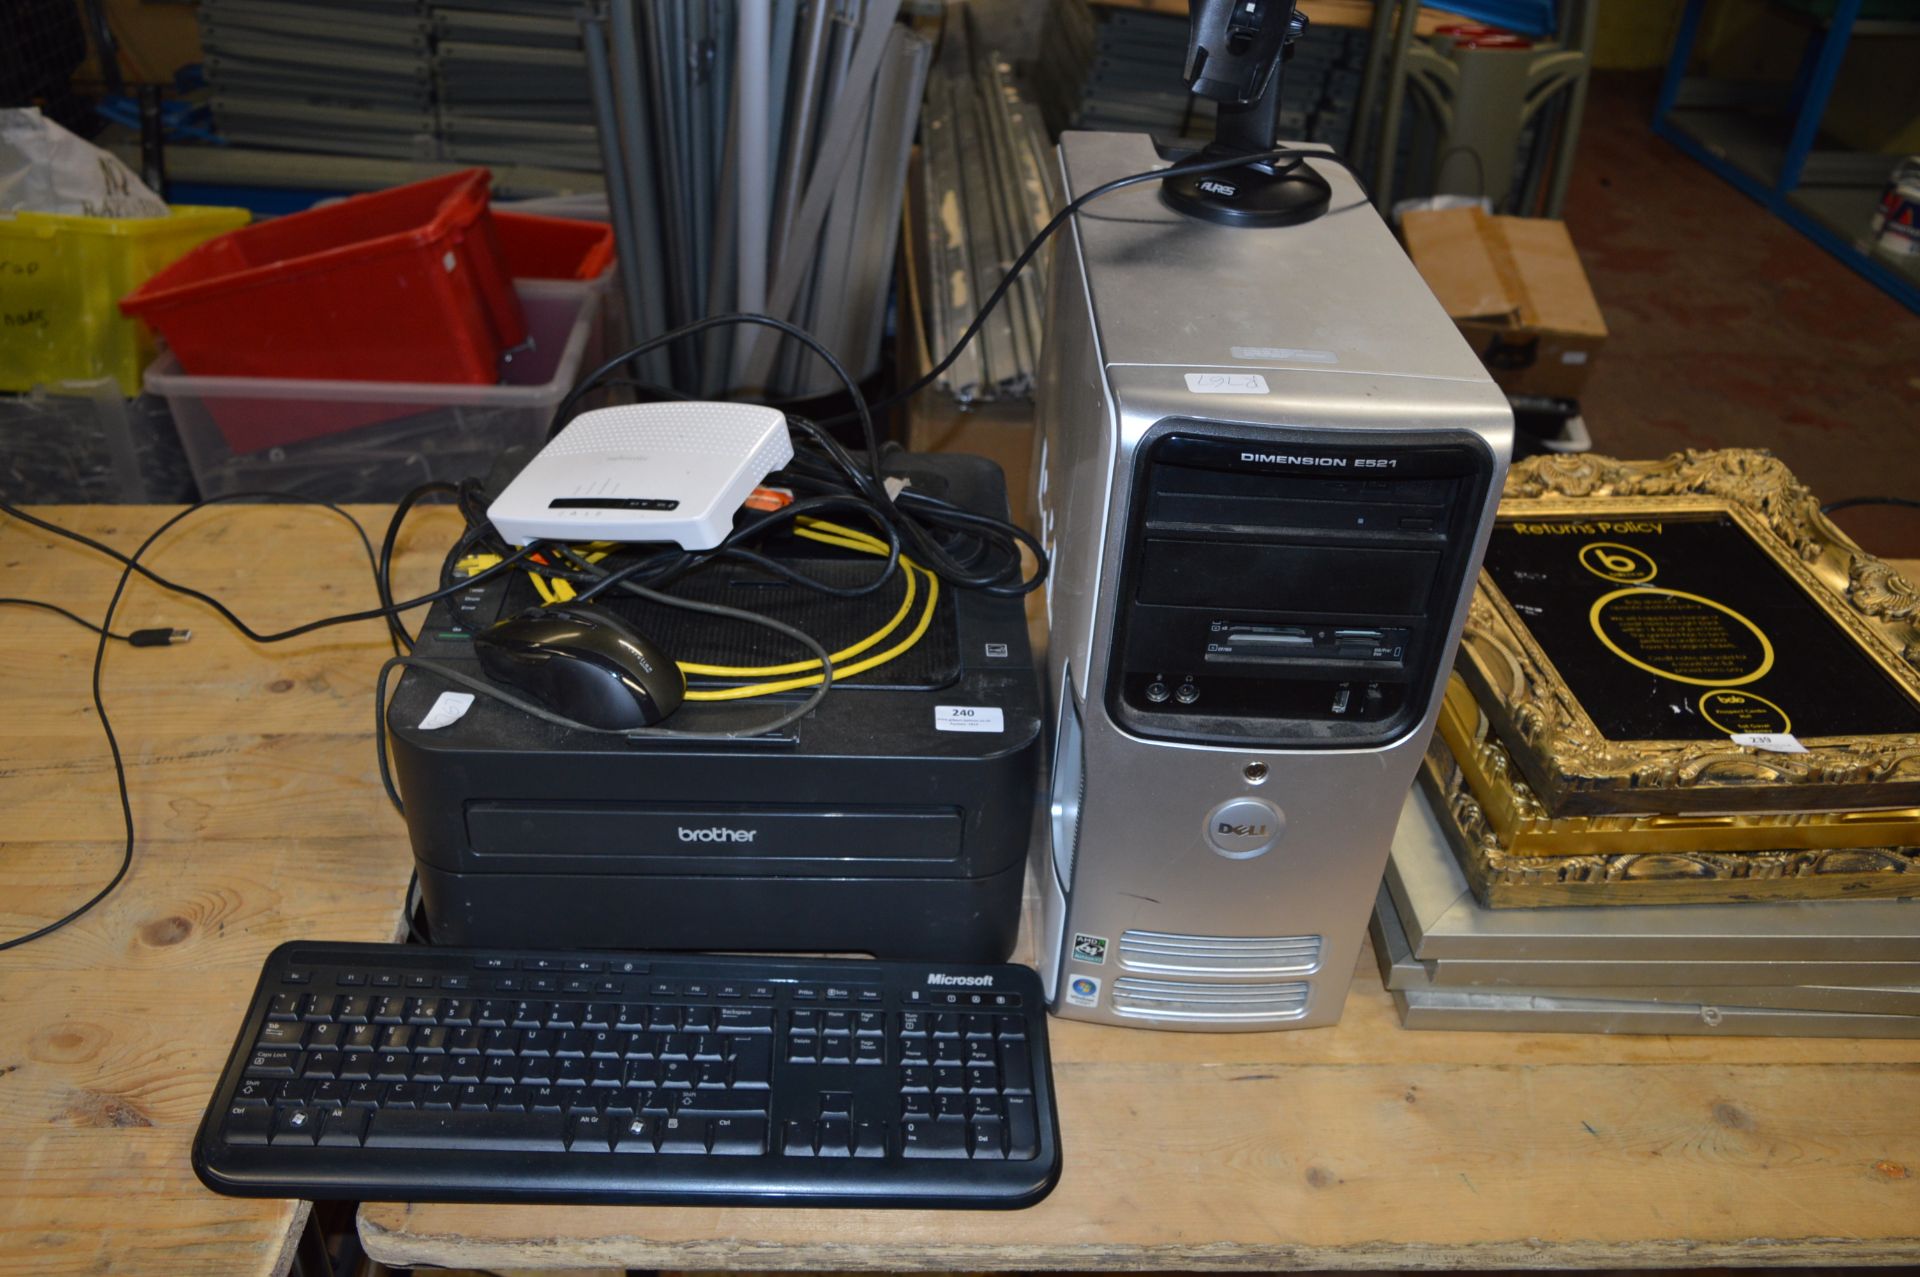 *Dell Computer Tower, Brother Printer, Barcode Reader, Keyboard and Accessories